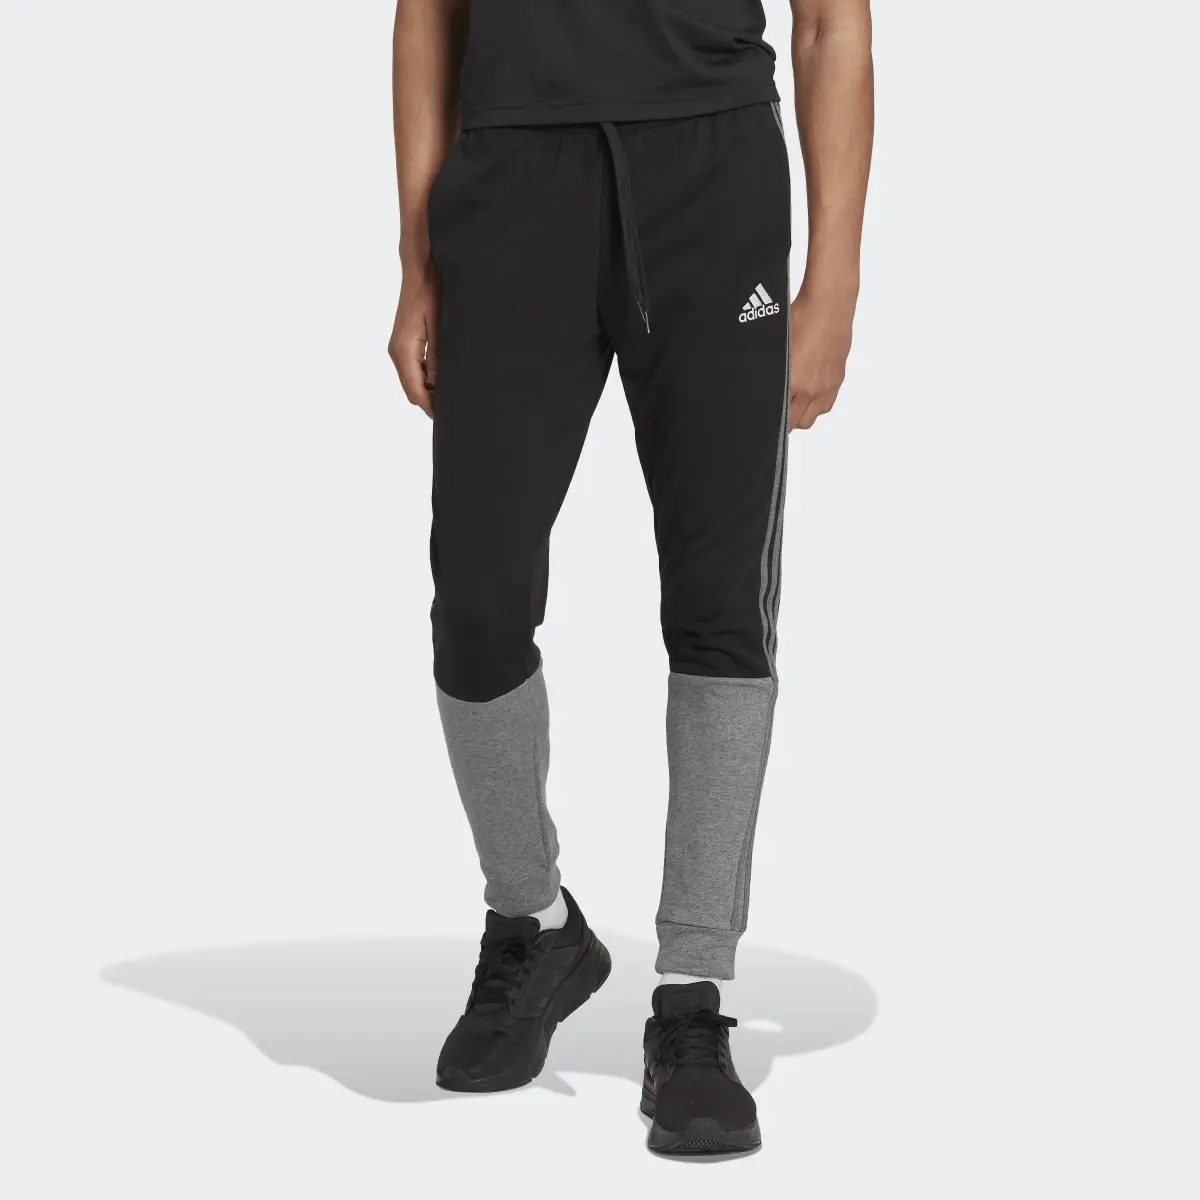 Adidas Essentials Mélange French Terry Pants. 1